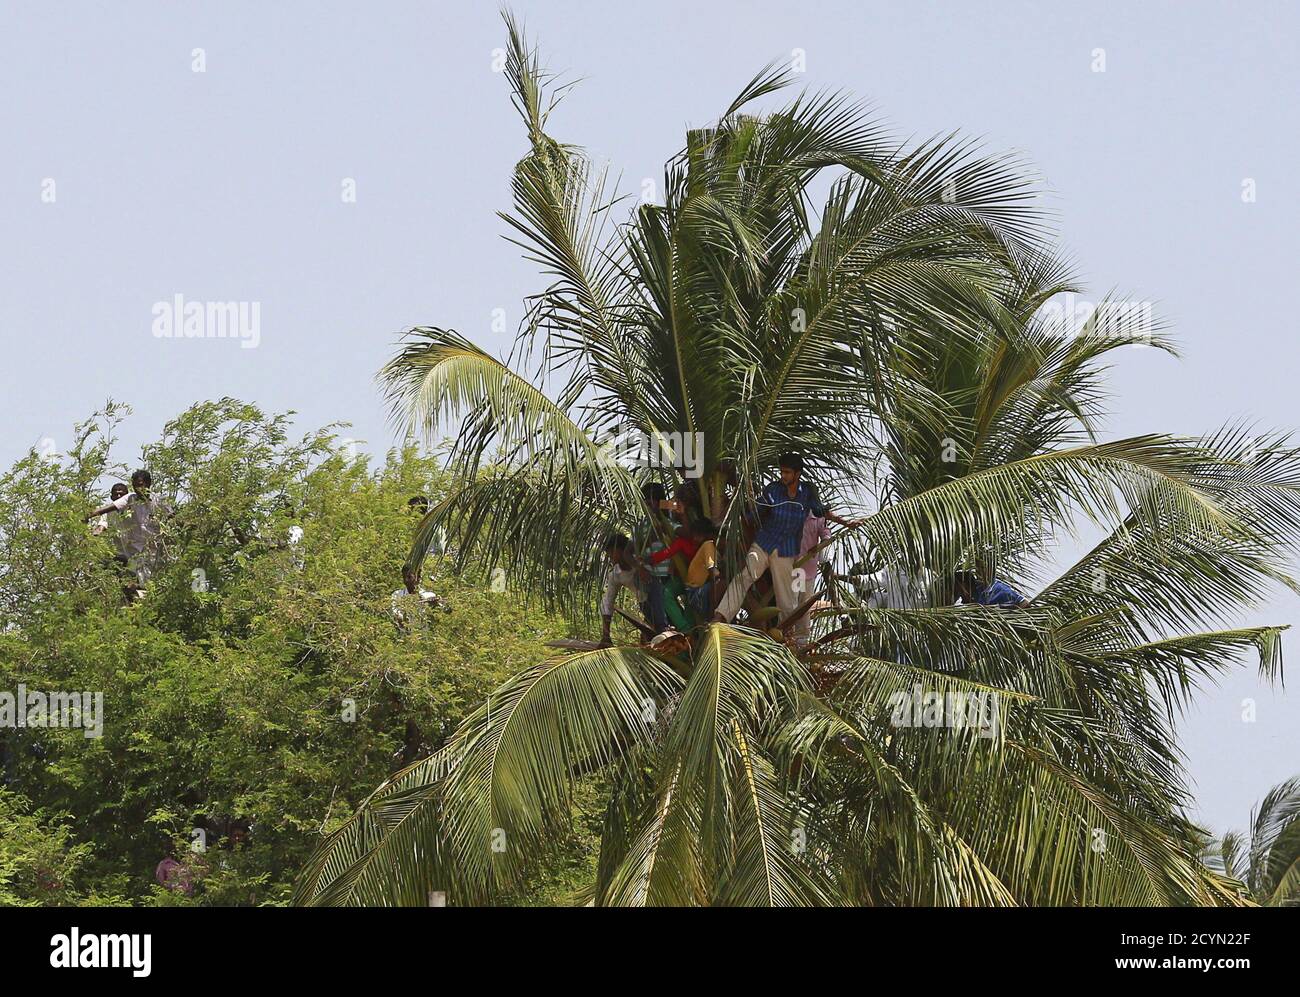 People climb trees as they watch the funeral ceremony of former Indian President A.P.J. Abdul Kalam in Rameswaram, India, July 30, 2015. Kalam, considered the father of the country's missile programme, died on Monday in hospital at the age of 83, a doctor said. Popularly known as 'Missile Man,' Kalam led the scientific team that developed missiles able to carry India's nuclear warheads. He became a national folk hero after helping oversee nuclear tests in 1998 that solidified India's status as a nuclear weapons state. REUTERS/Danish Siddiqui Stock Photo